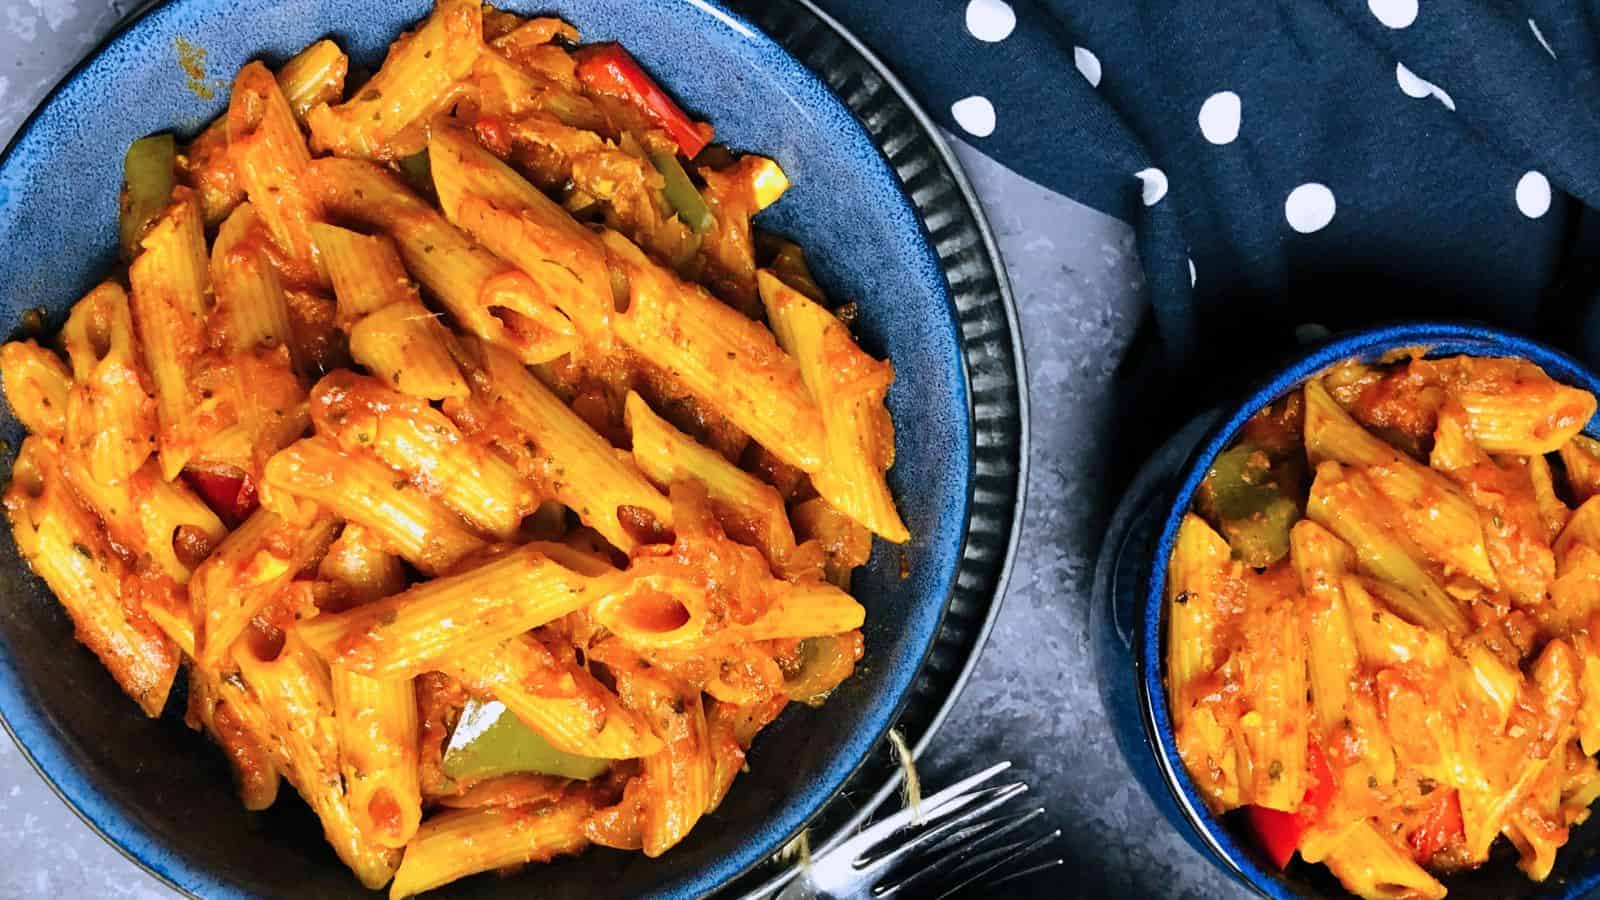 Two bowls of Masala Pasta, served on a dark blue textured surface.